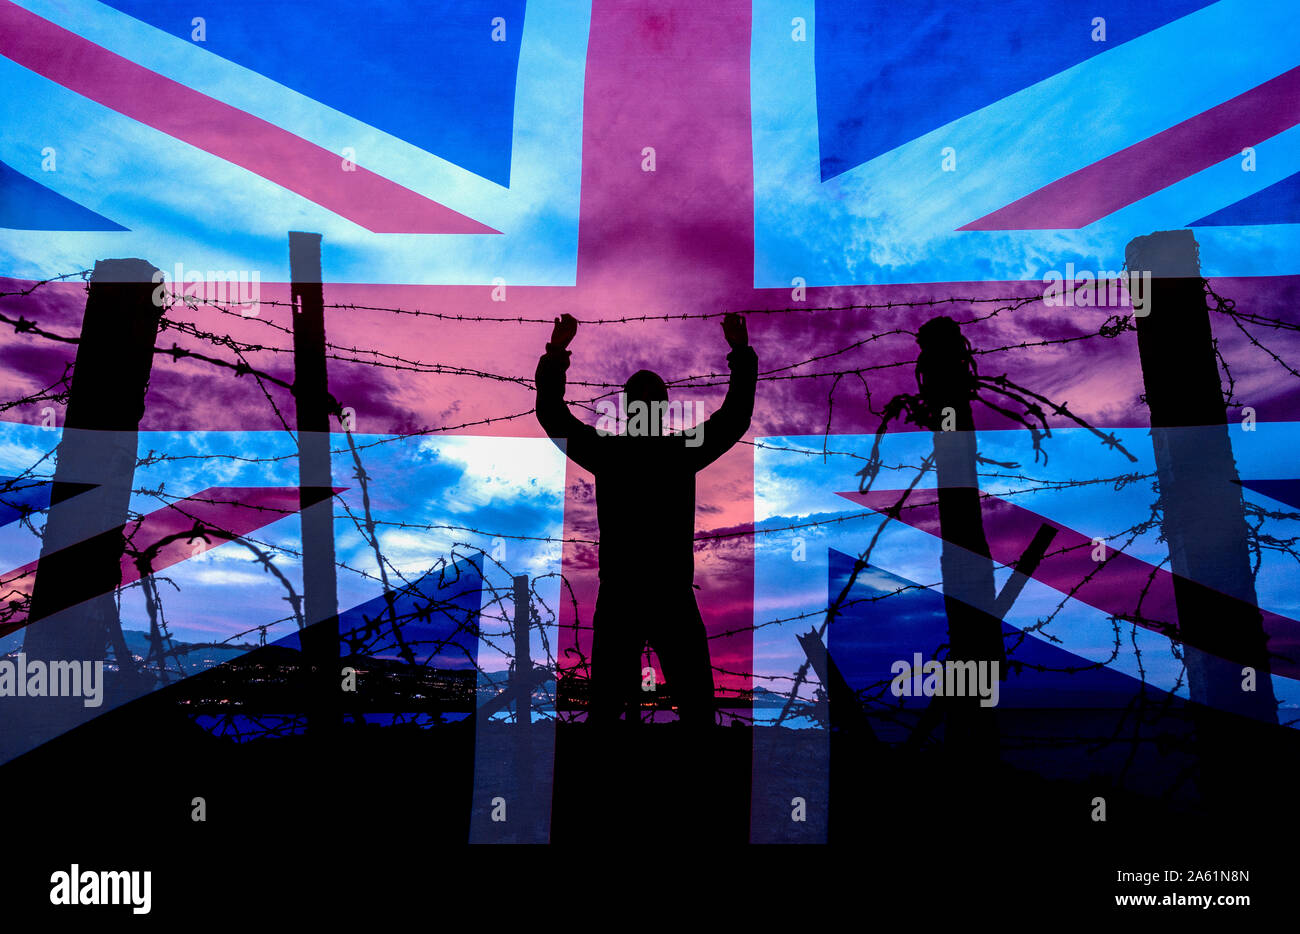 Man looking through barbed wire, razor wire fence at night. Brexit, illegal immigration, human trafficking,  asylum... concept image Stock Photo